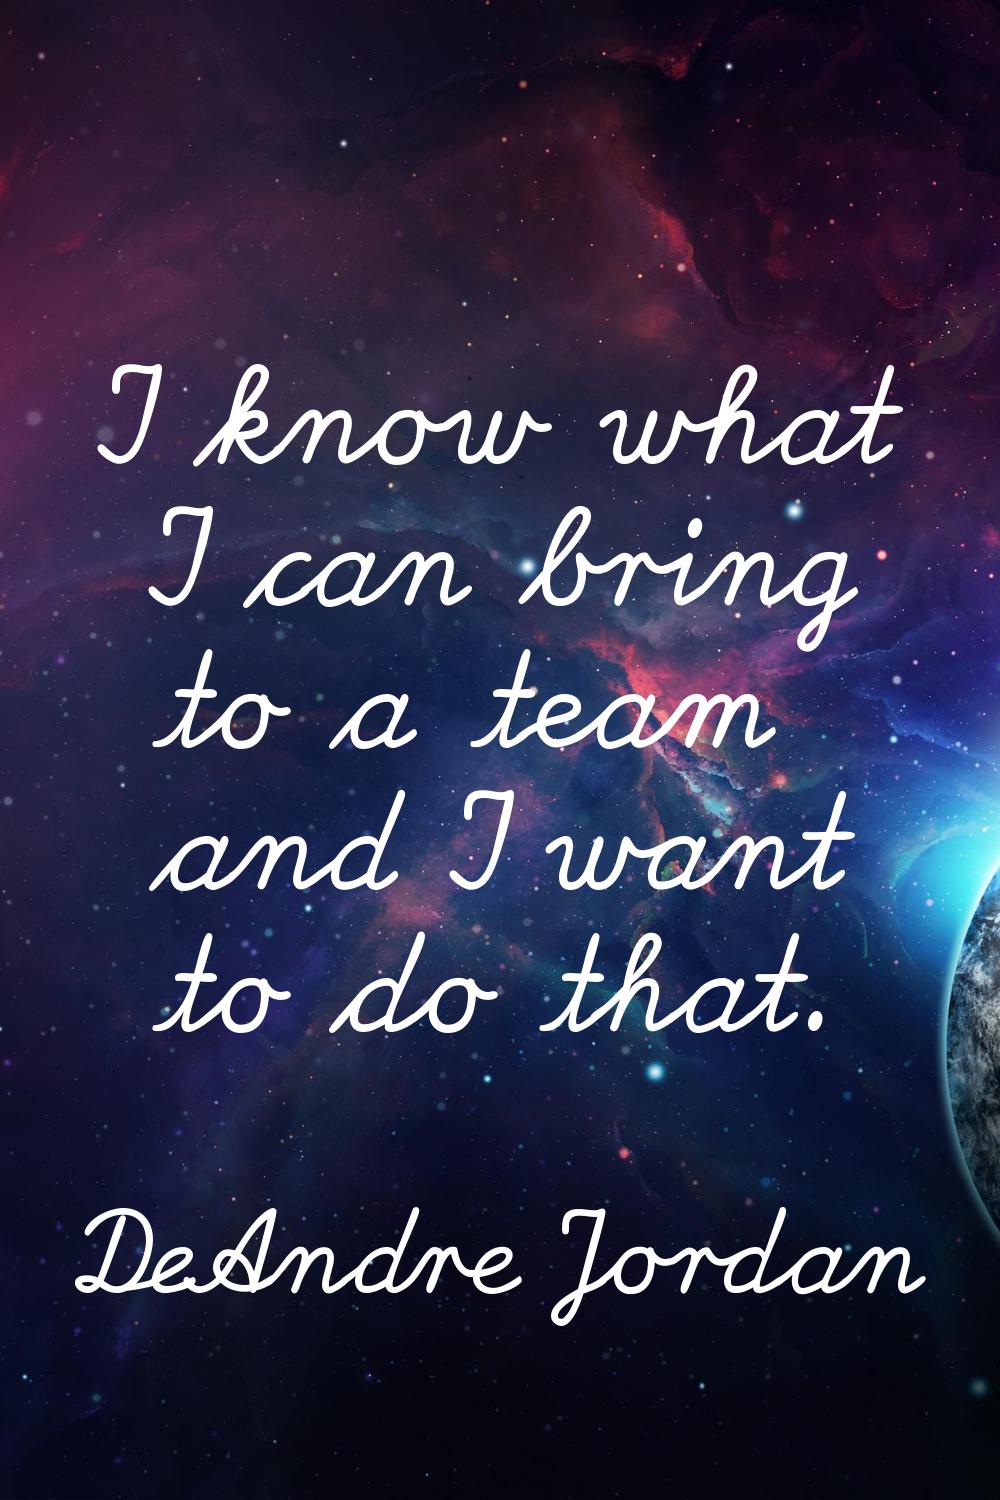 I know what I can bring to a team and I want to do that.